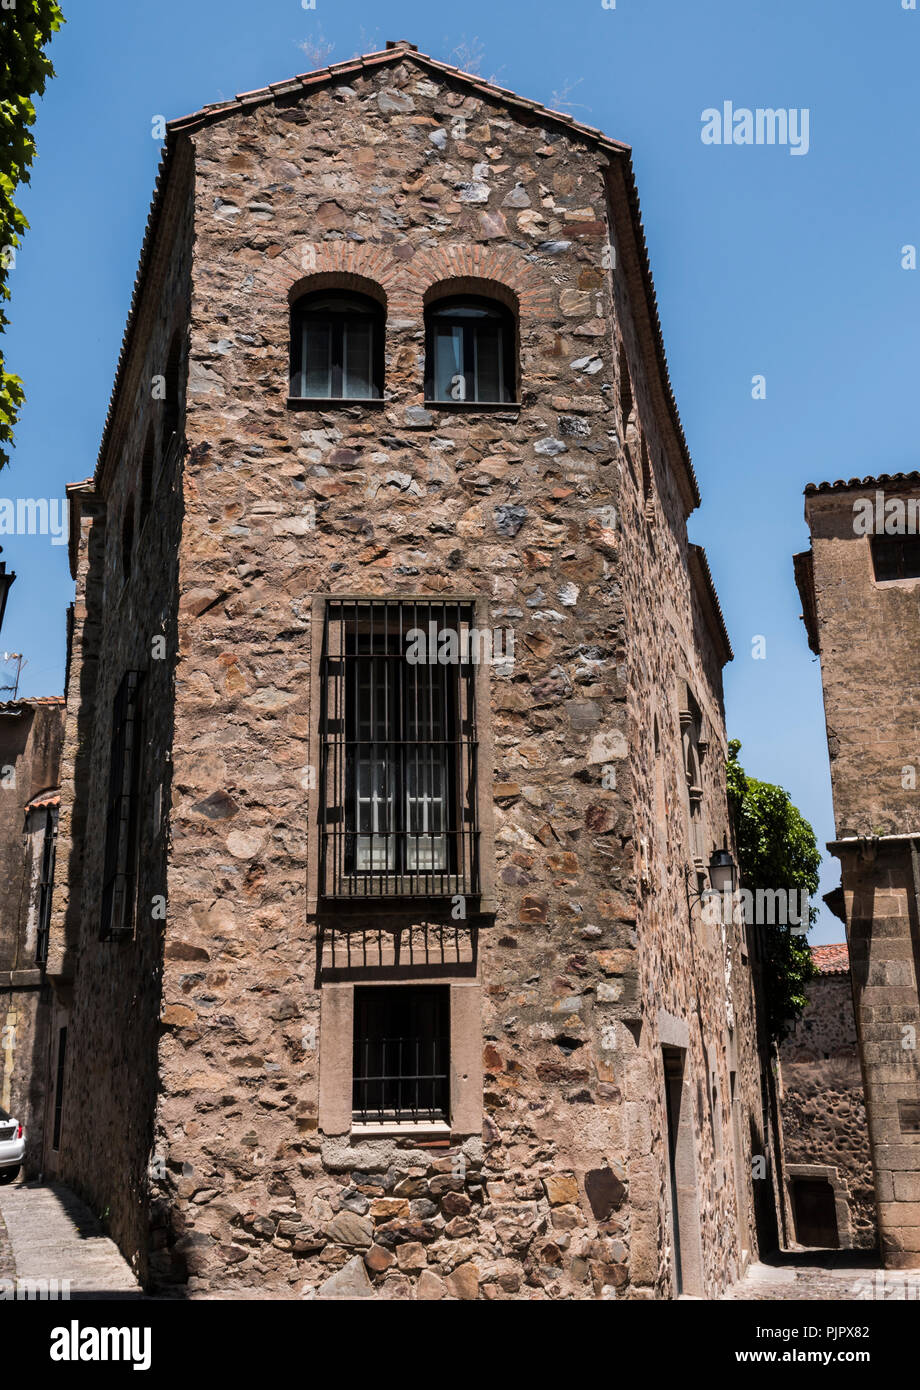 Typical house of the old town of Caceres, Spain Stock Photo